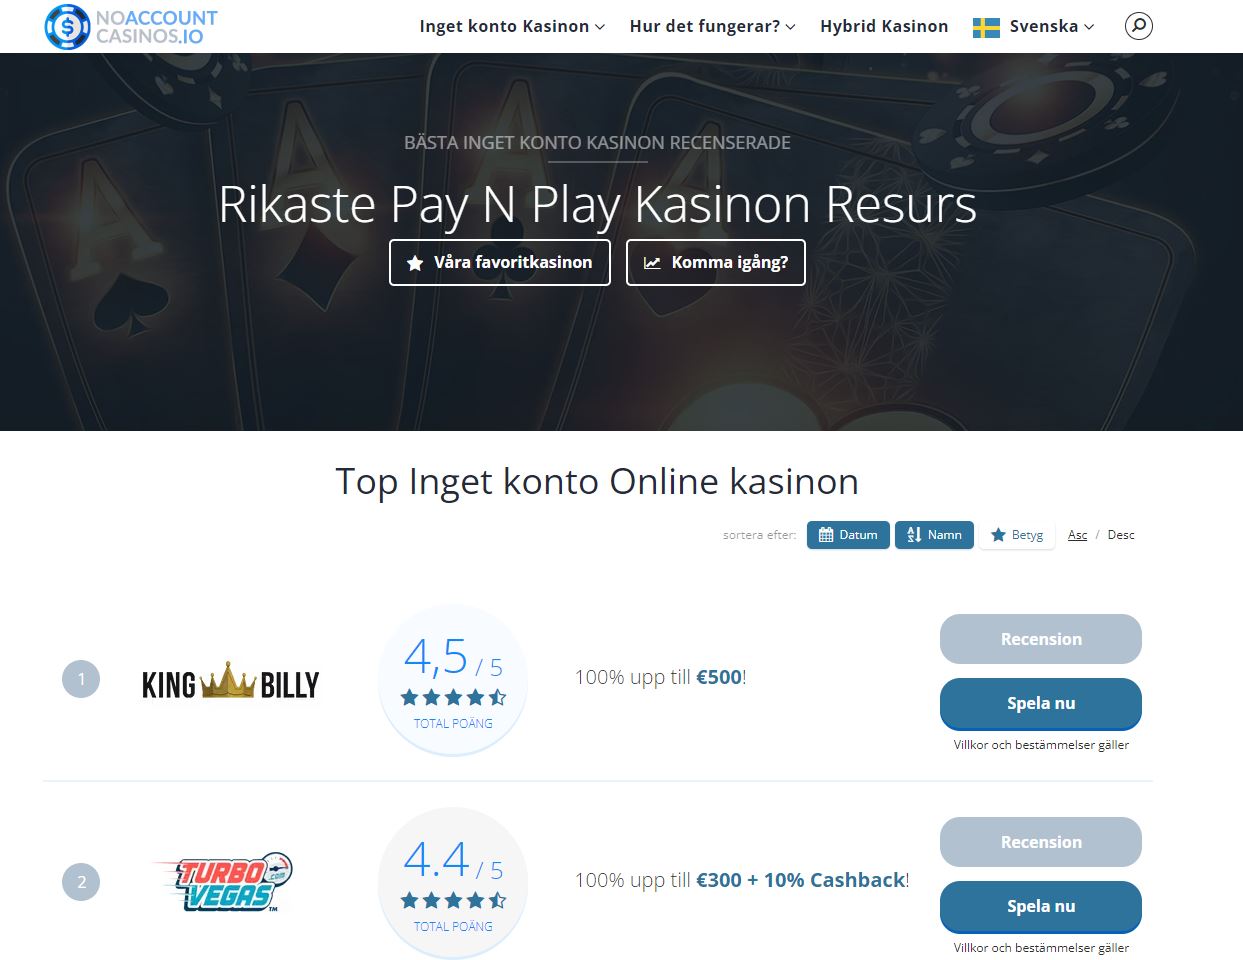 What You Should Know About Online Casinos Without an Account Sweden